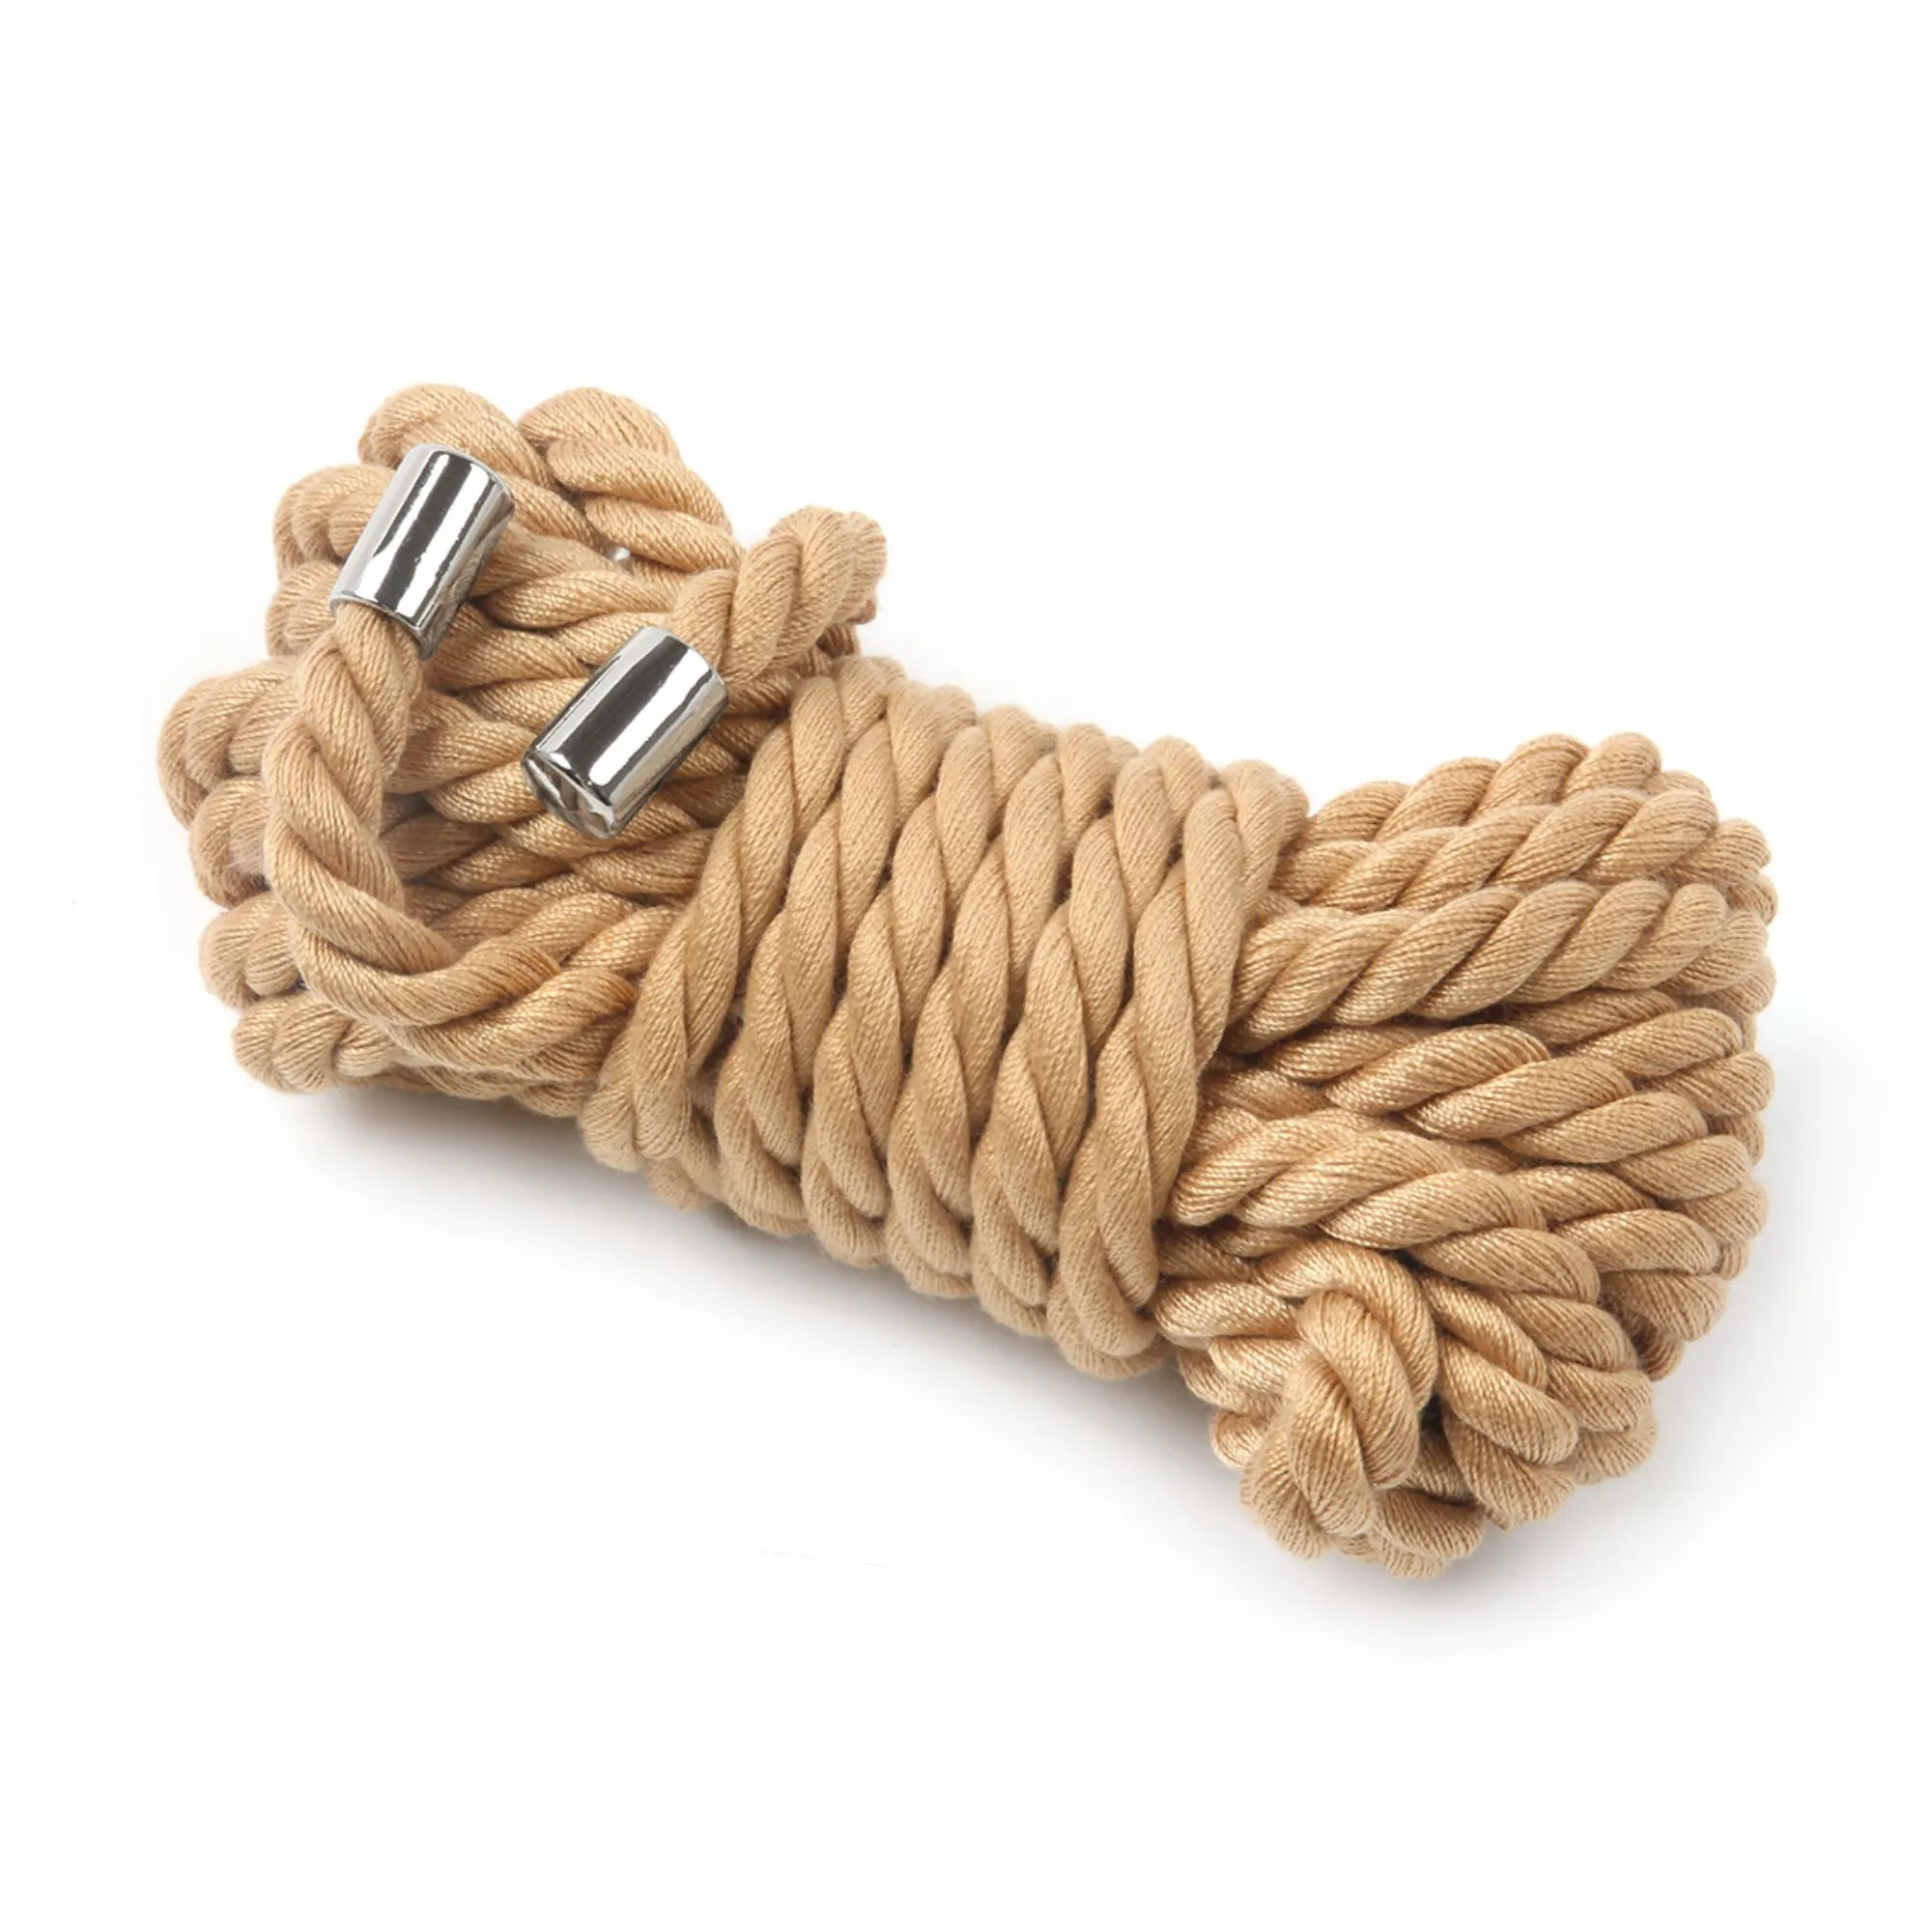 How to make a twisted rope